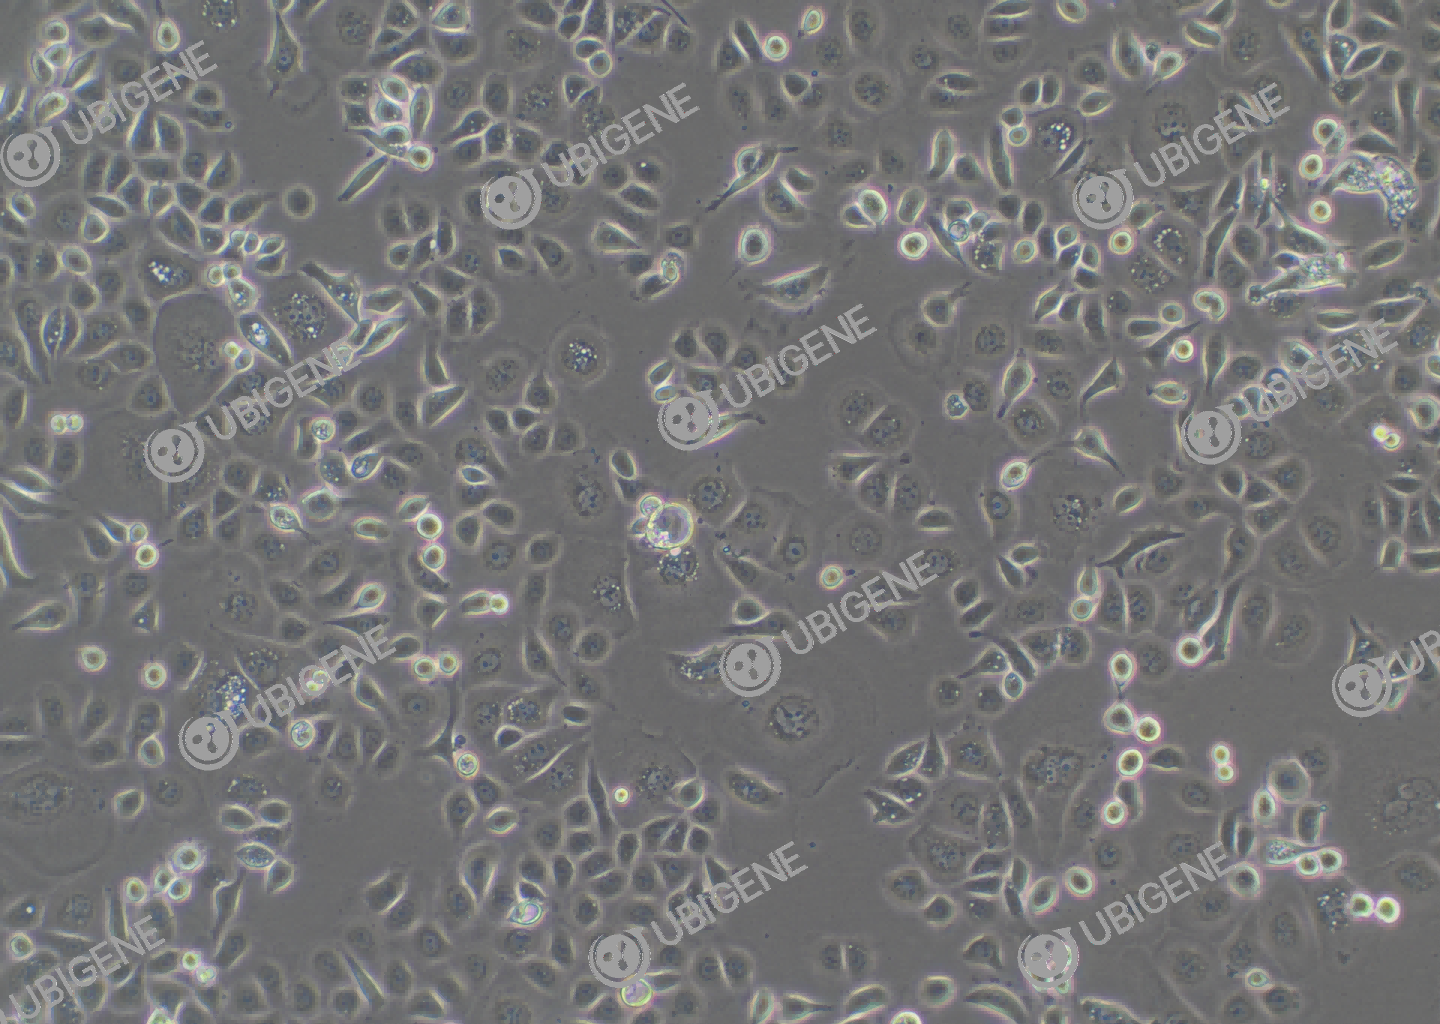 AGS cell line Cultured cell morphology